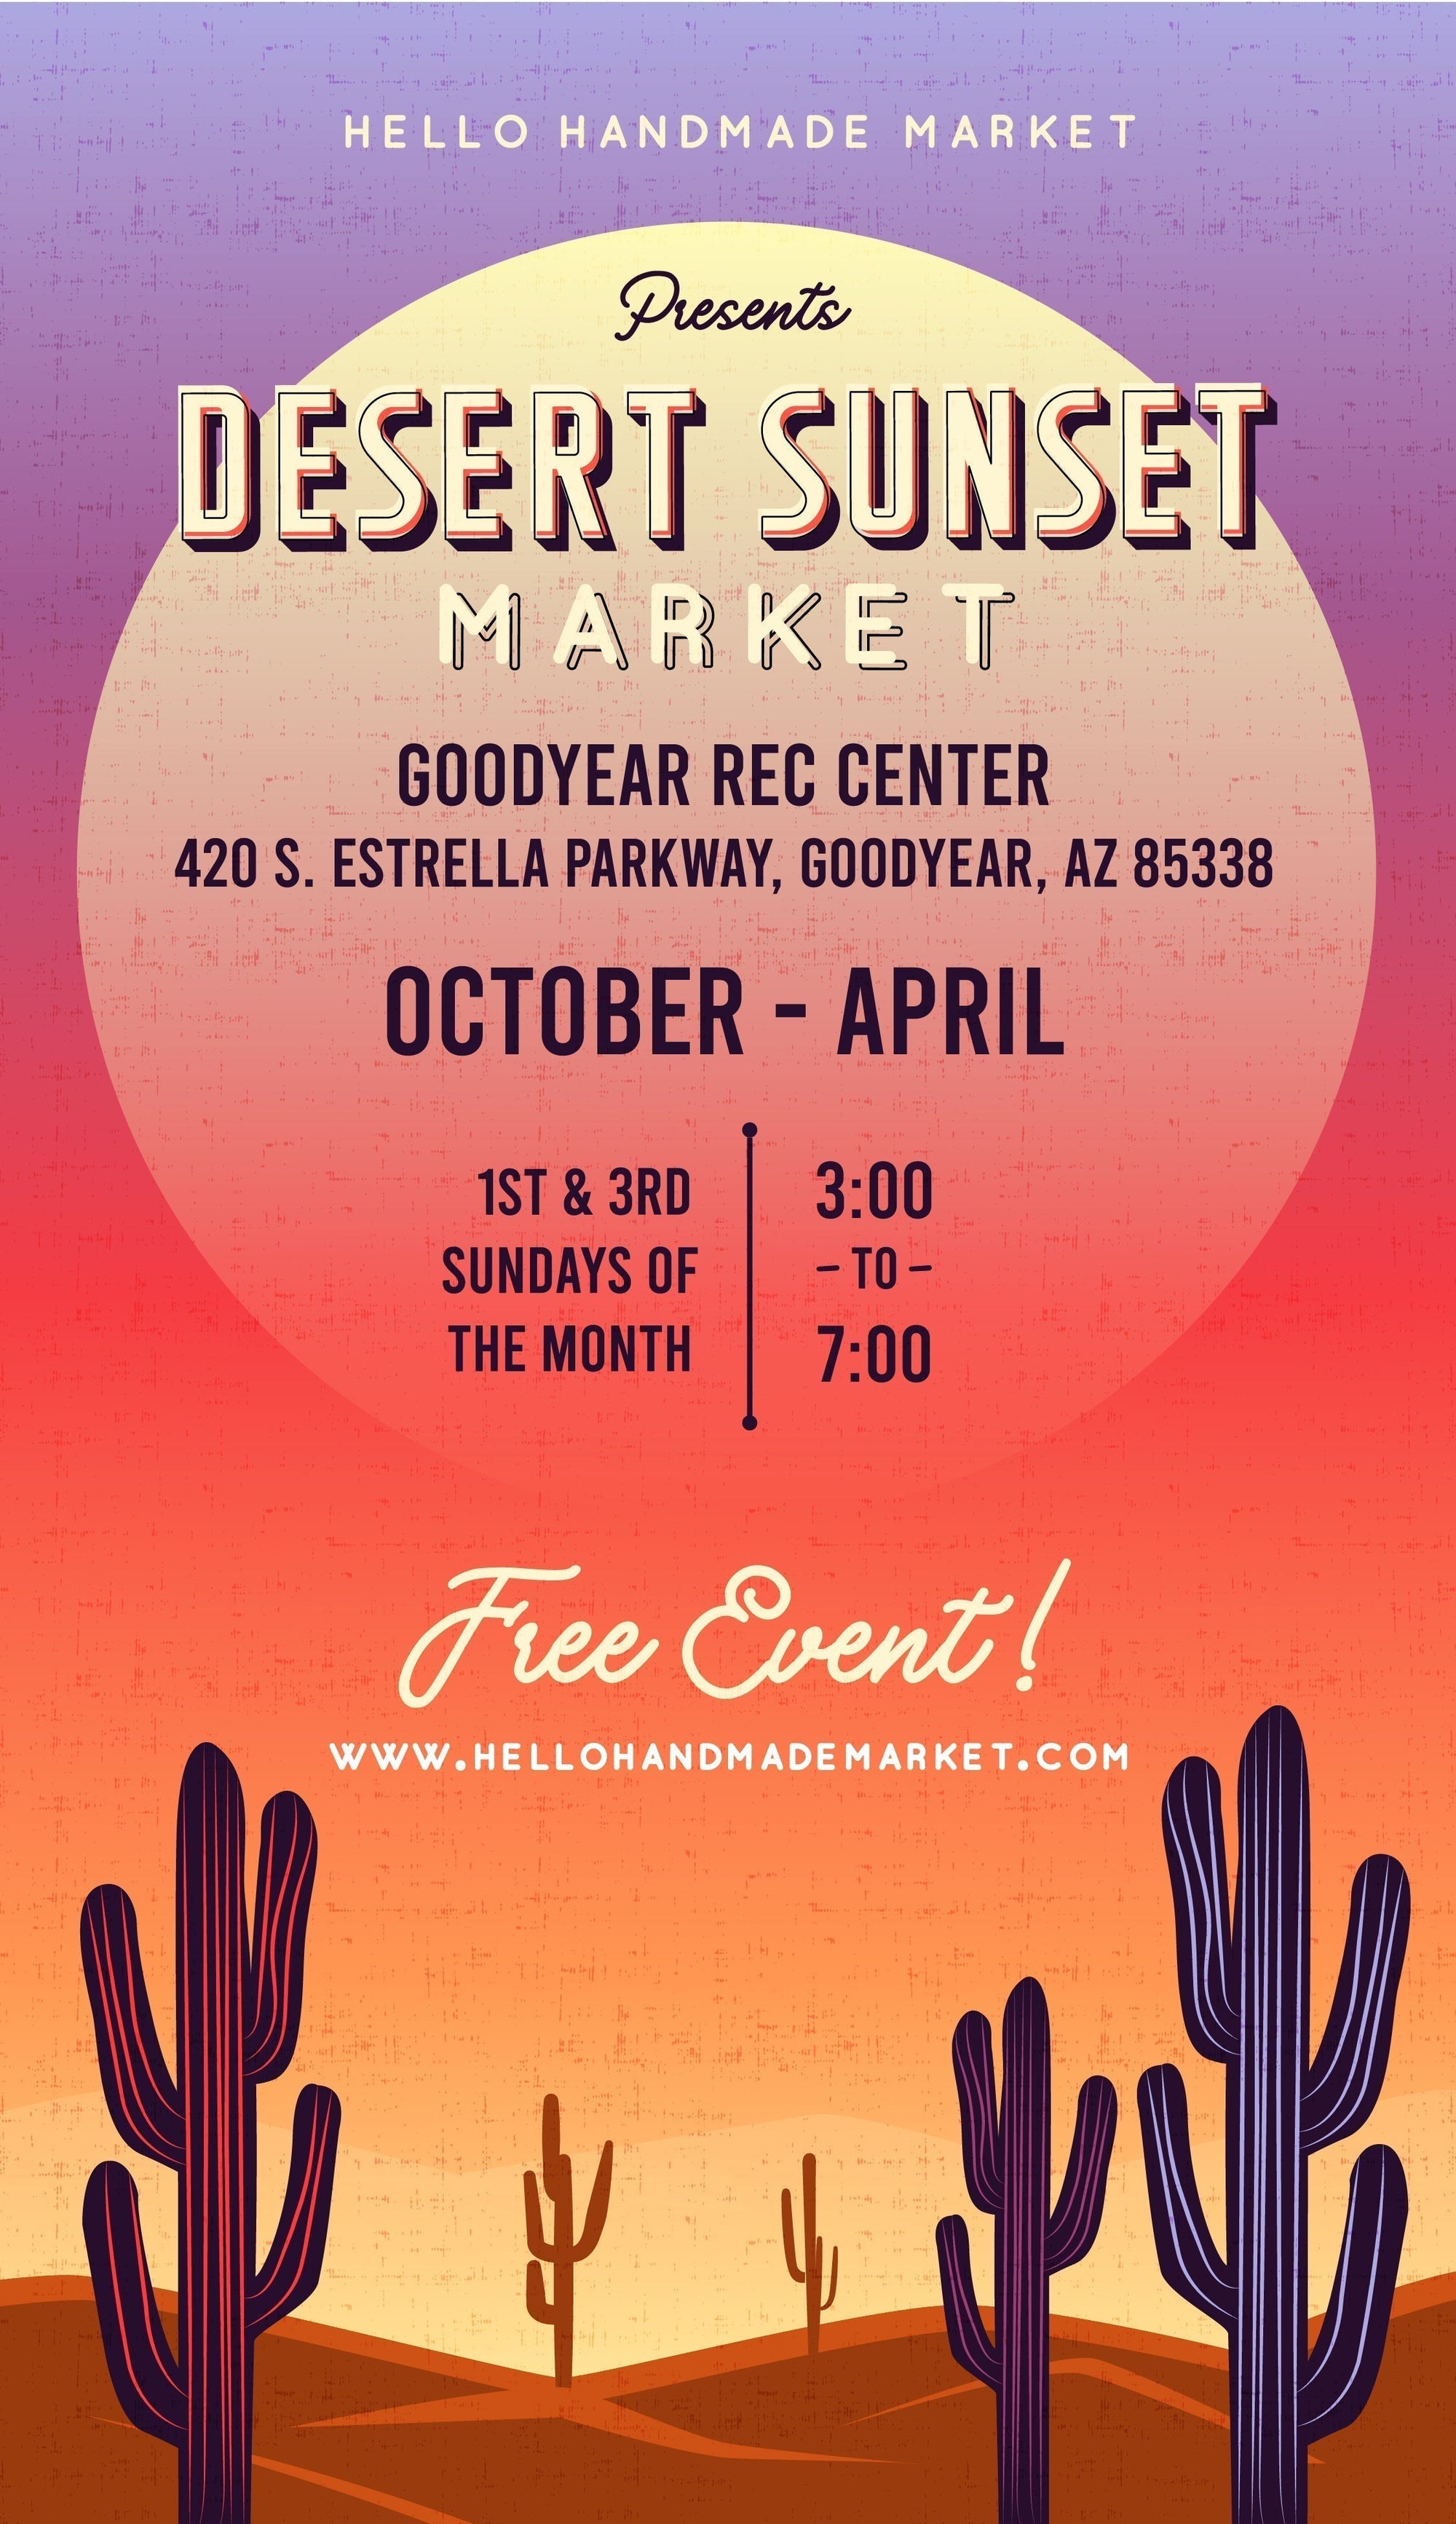 Be a Vendor on March 2, 2025 for the Desert Sunset Market at the Goodyear Recreation Center